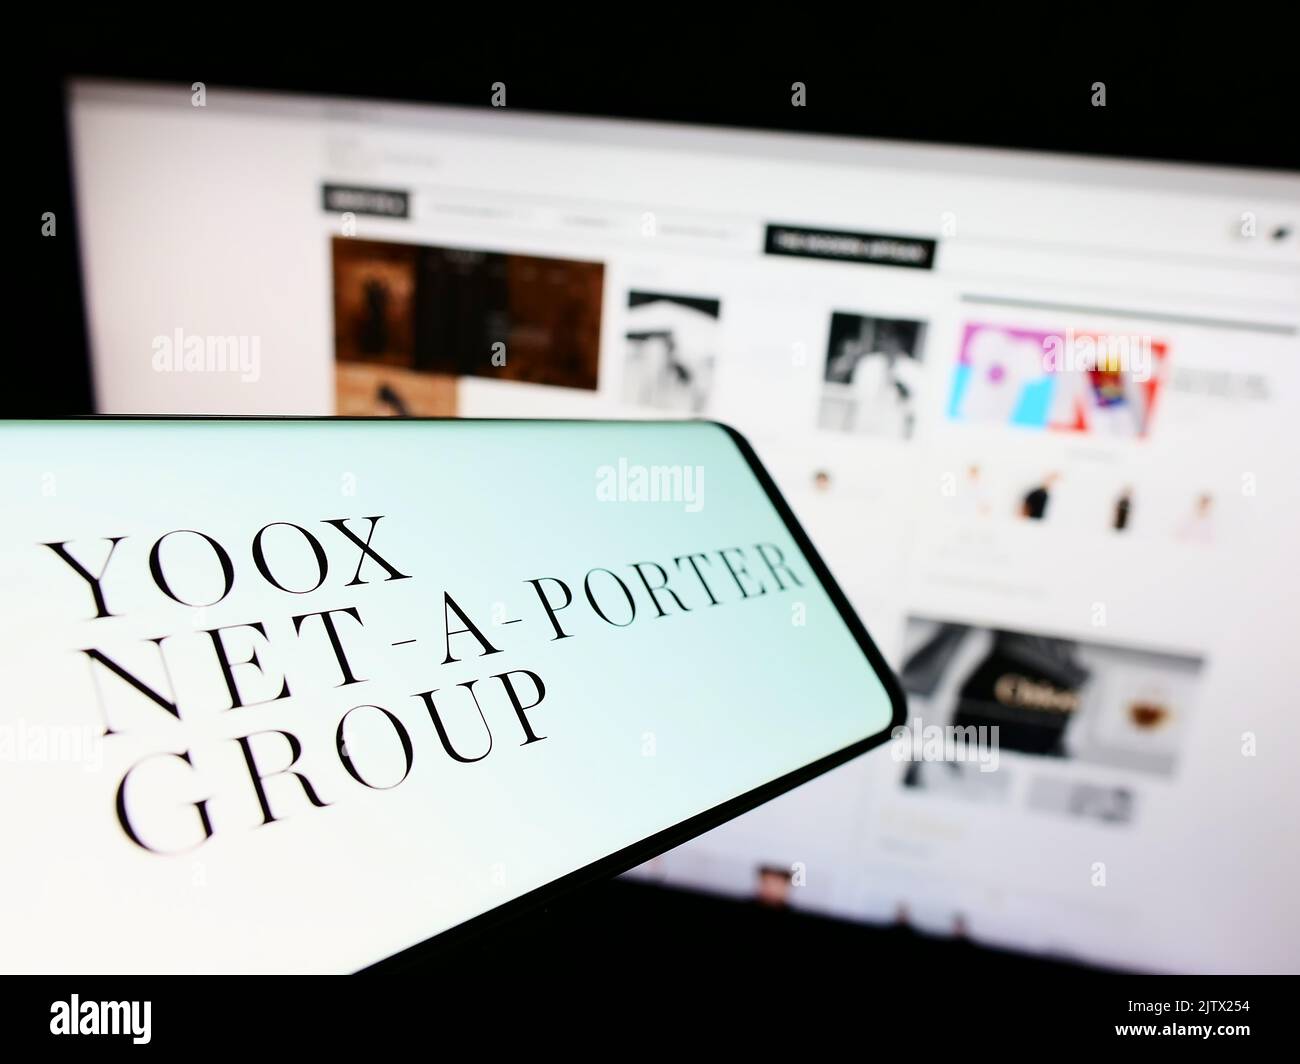 Mobile phone with logo of company YOOX Net-a-Porter Group S.p.A. (YNAP) on screen in front of business website. Focus on center of phone display. Stock Photo